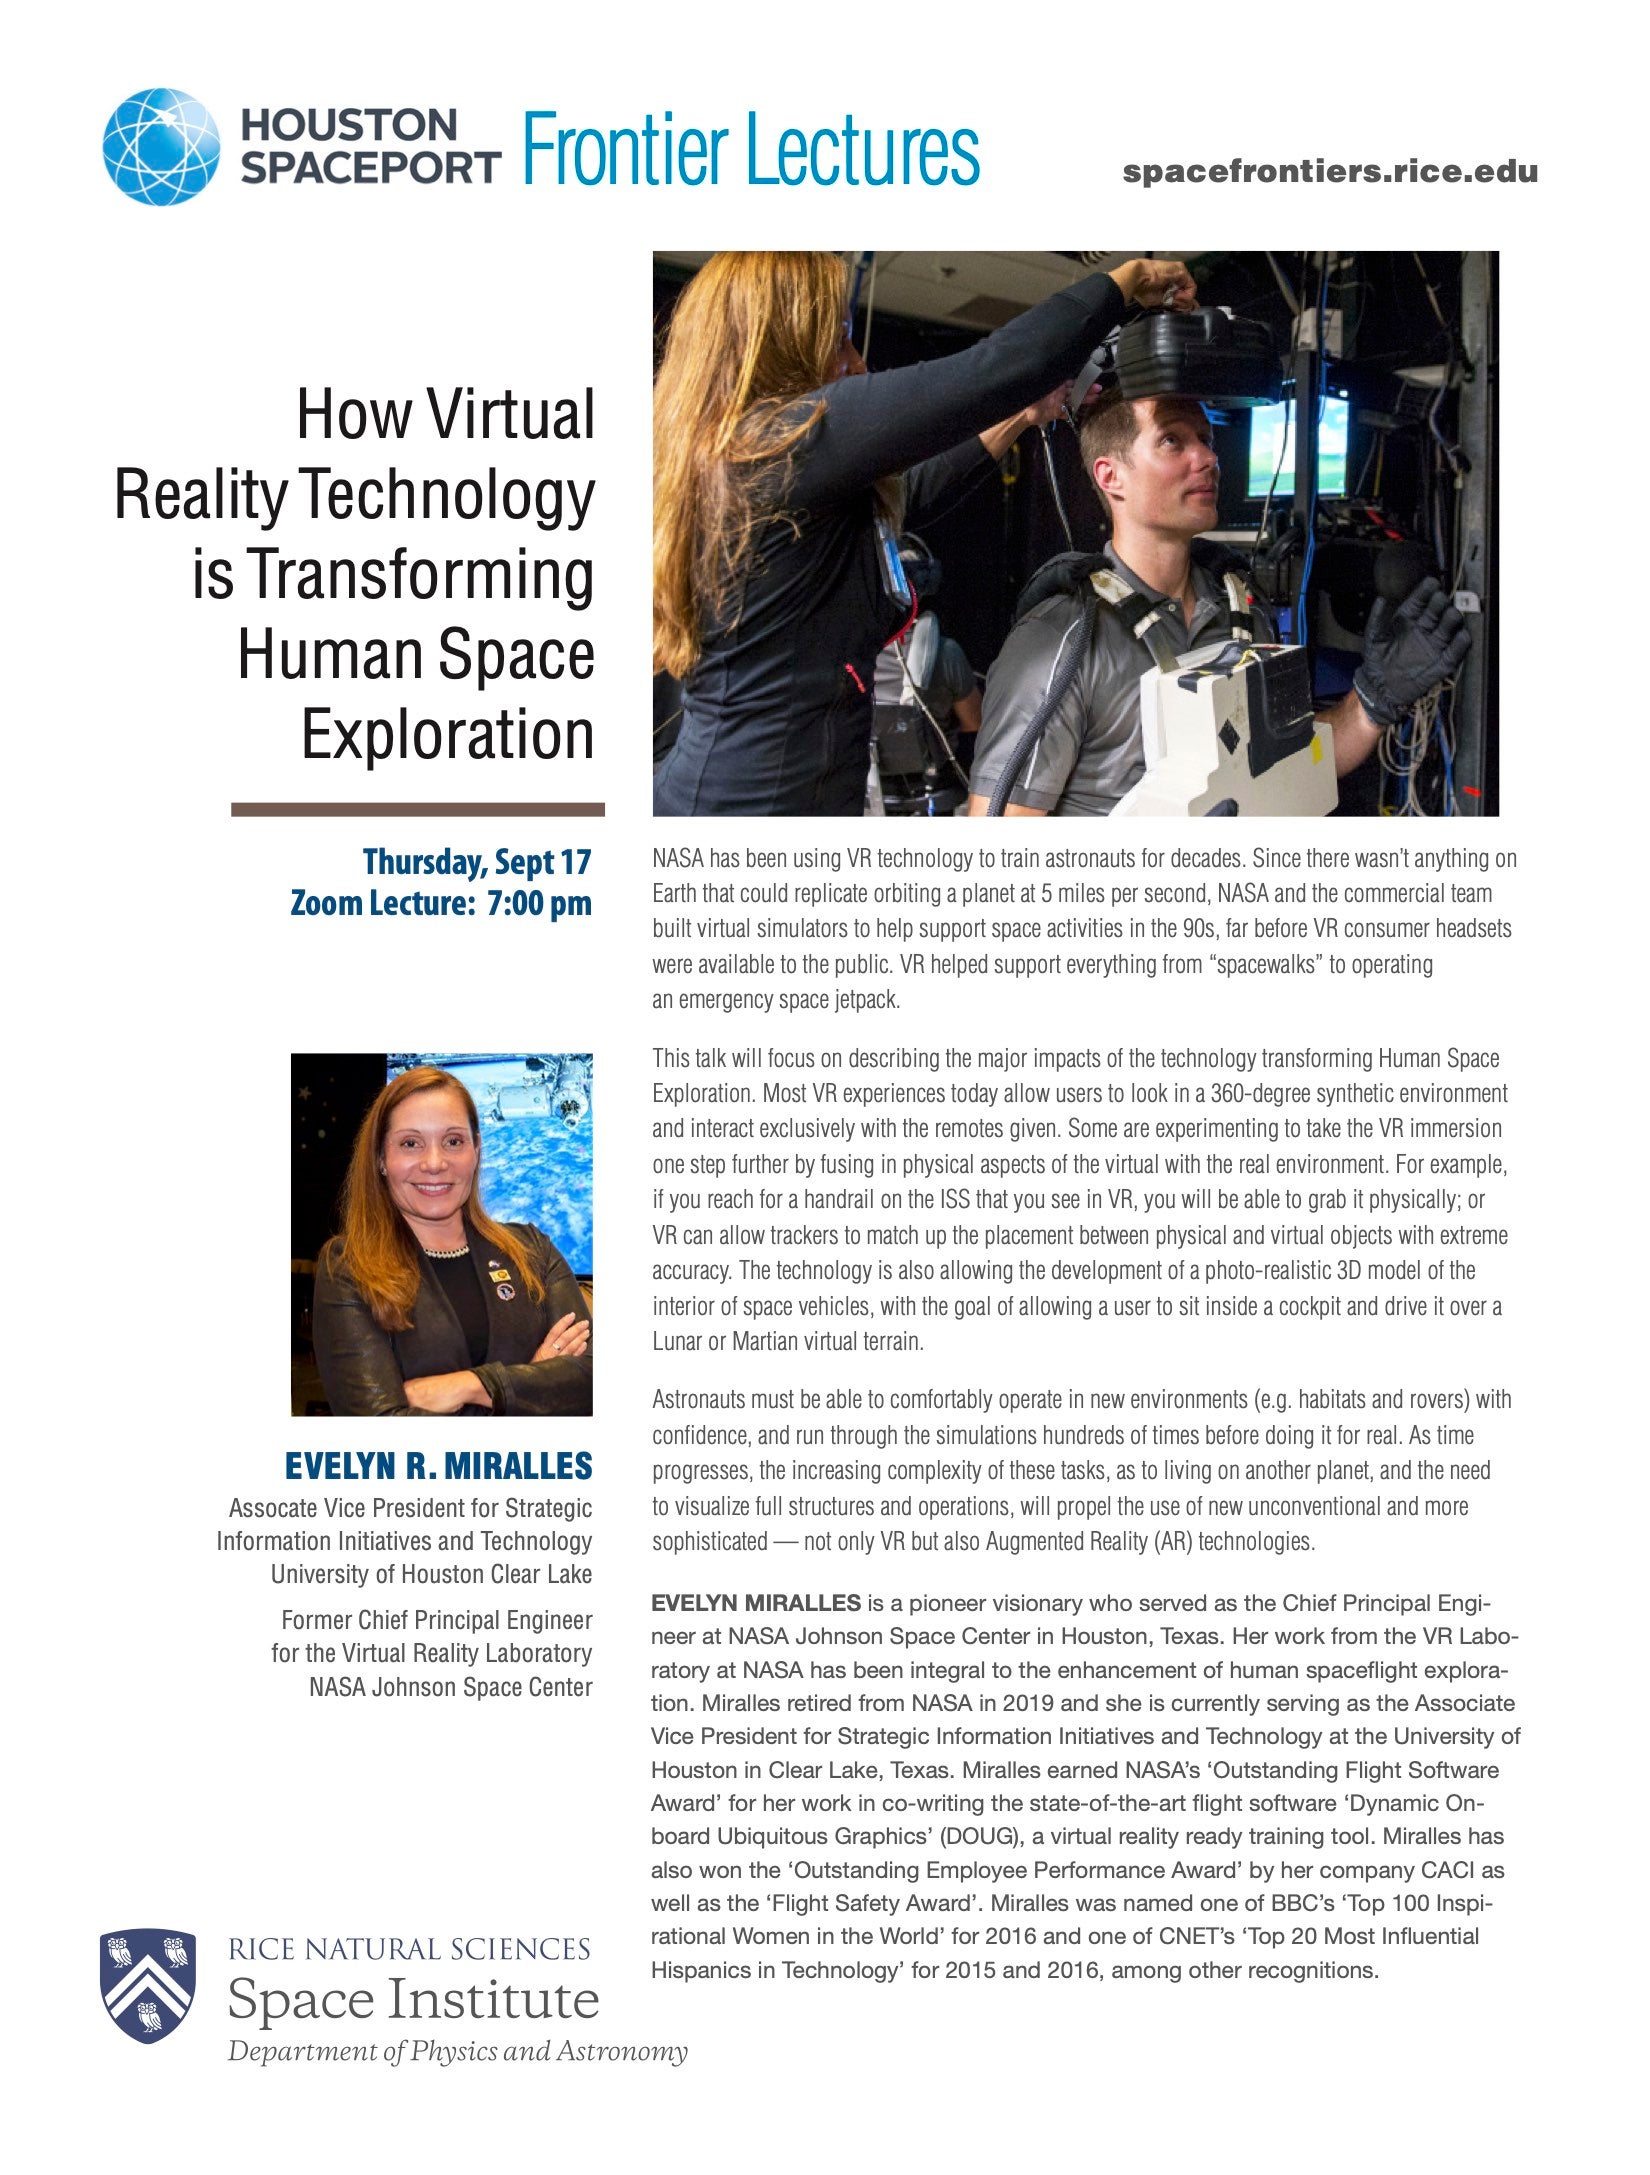 Poster of Evelyn Miralles' presentation on How vr technology changed human space exploration